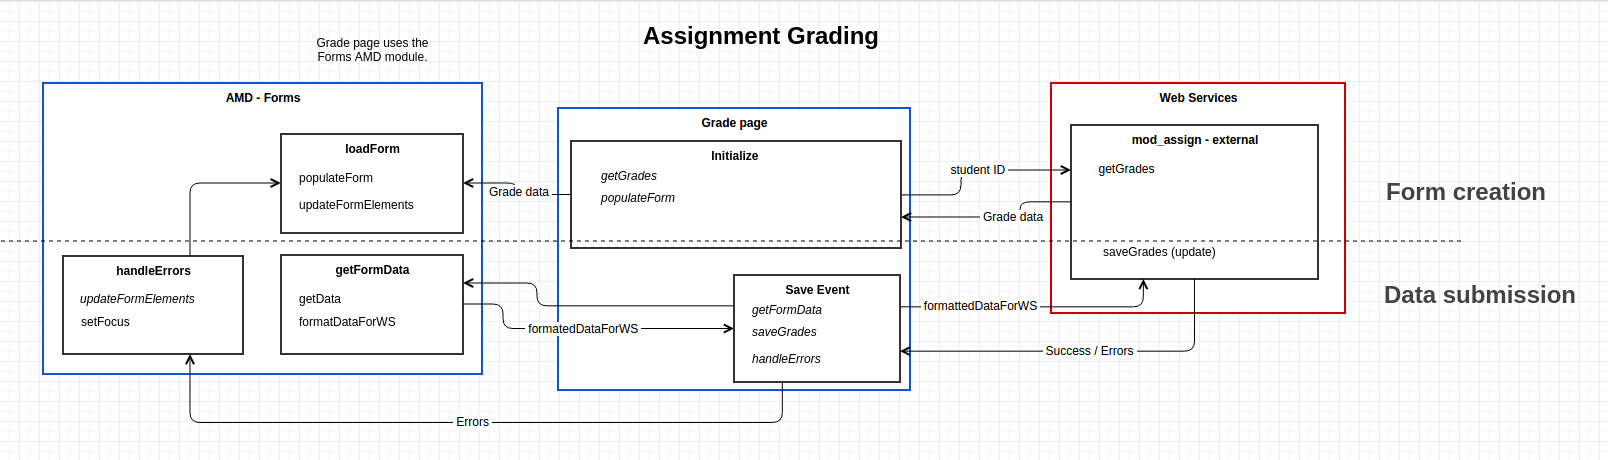 assignment-grading.png